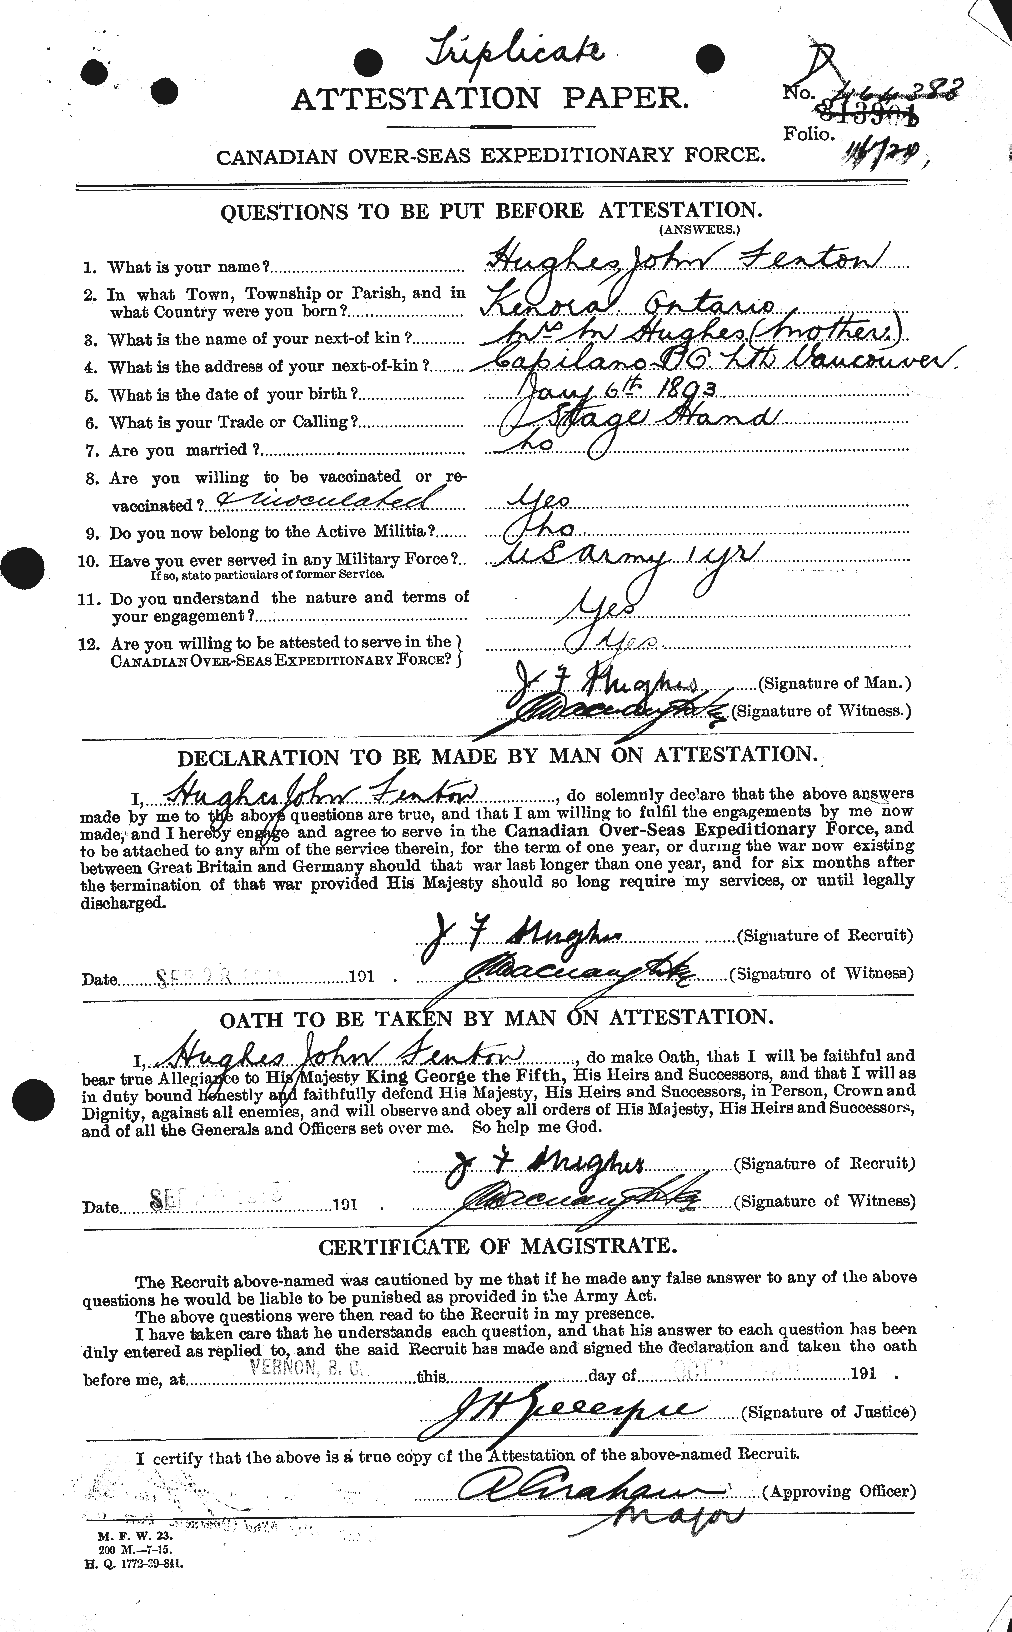 Personnel Records of the First World War - CEF 404018a